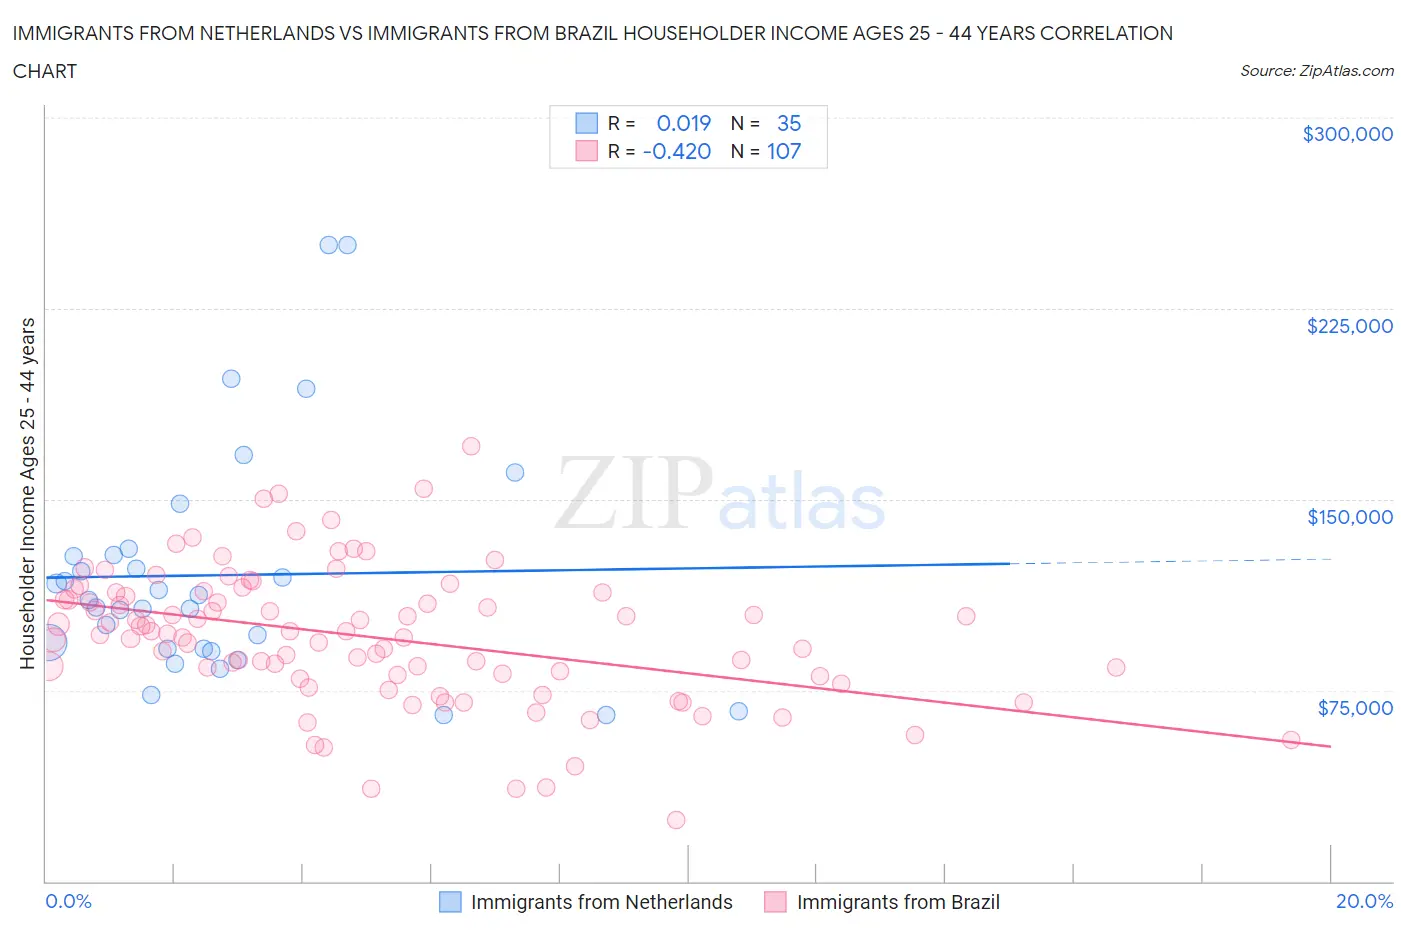 Immigrants from Netherlands vs Immigrants from Brazil Householder Income Ages 25 - 44 years